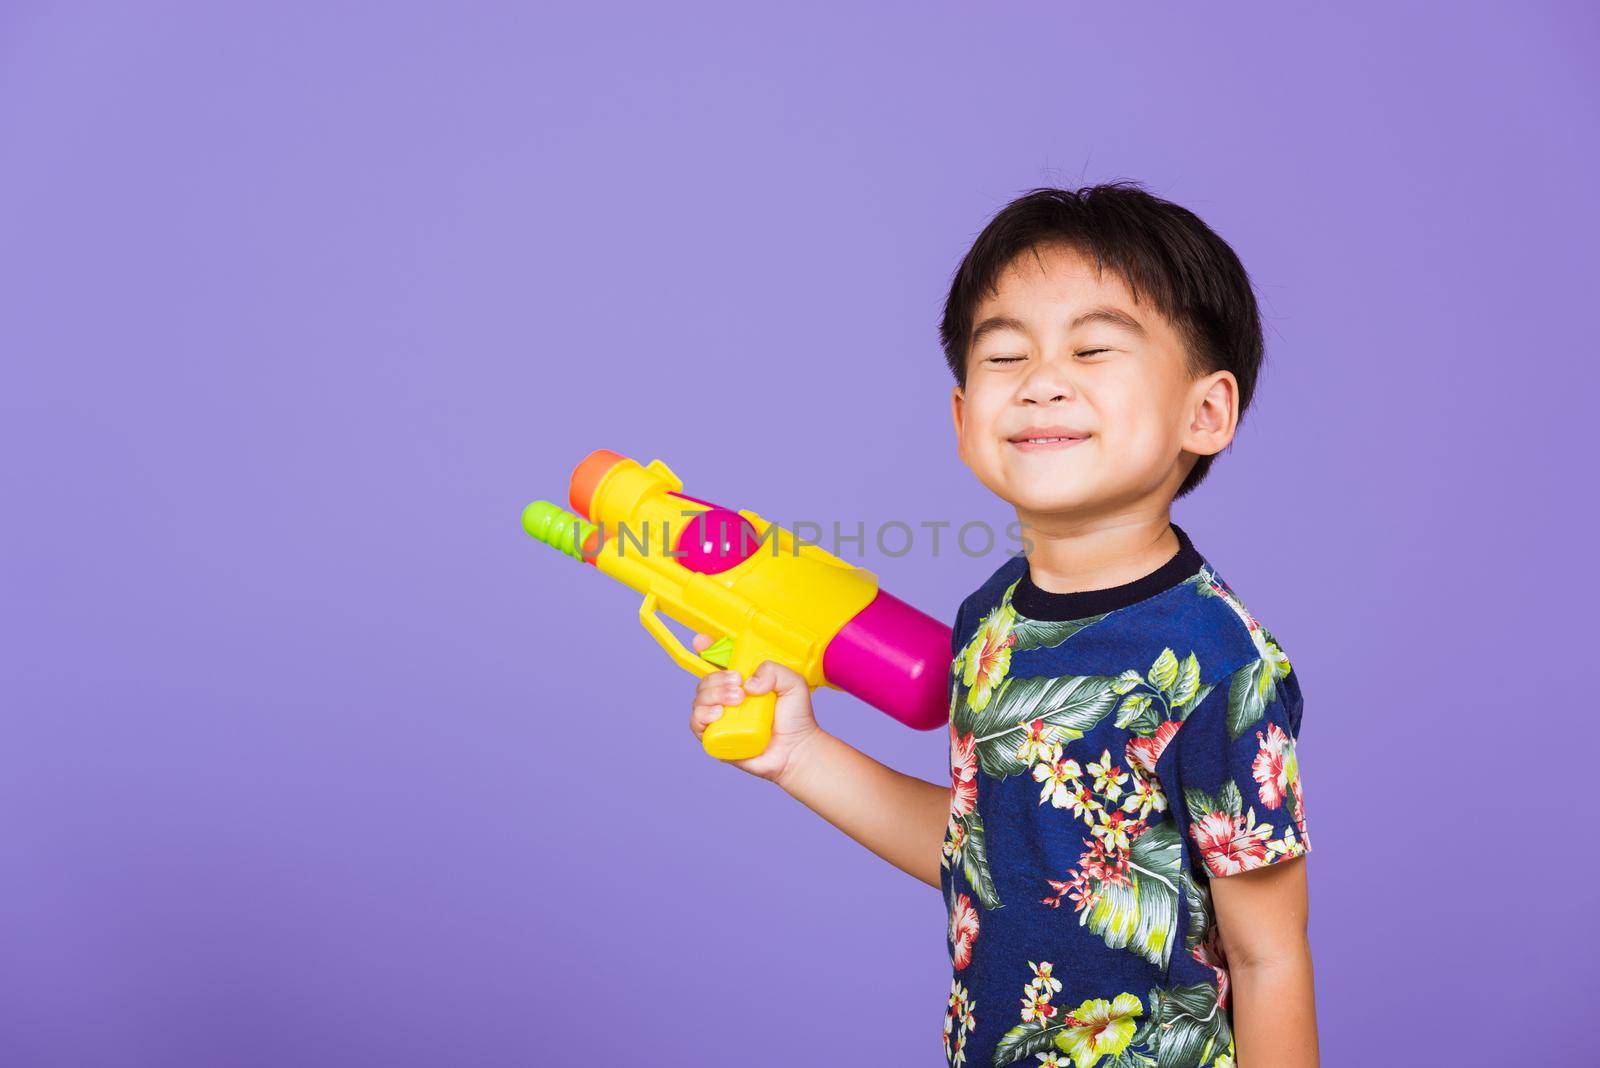 Thai kid funny hold toy water pistol and smiling, Happy Asian little boy holding plastic water gun, studio shot isolated on purple background, Thailand Songkran festival day national culture concept